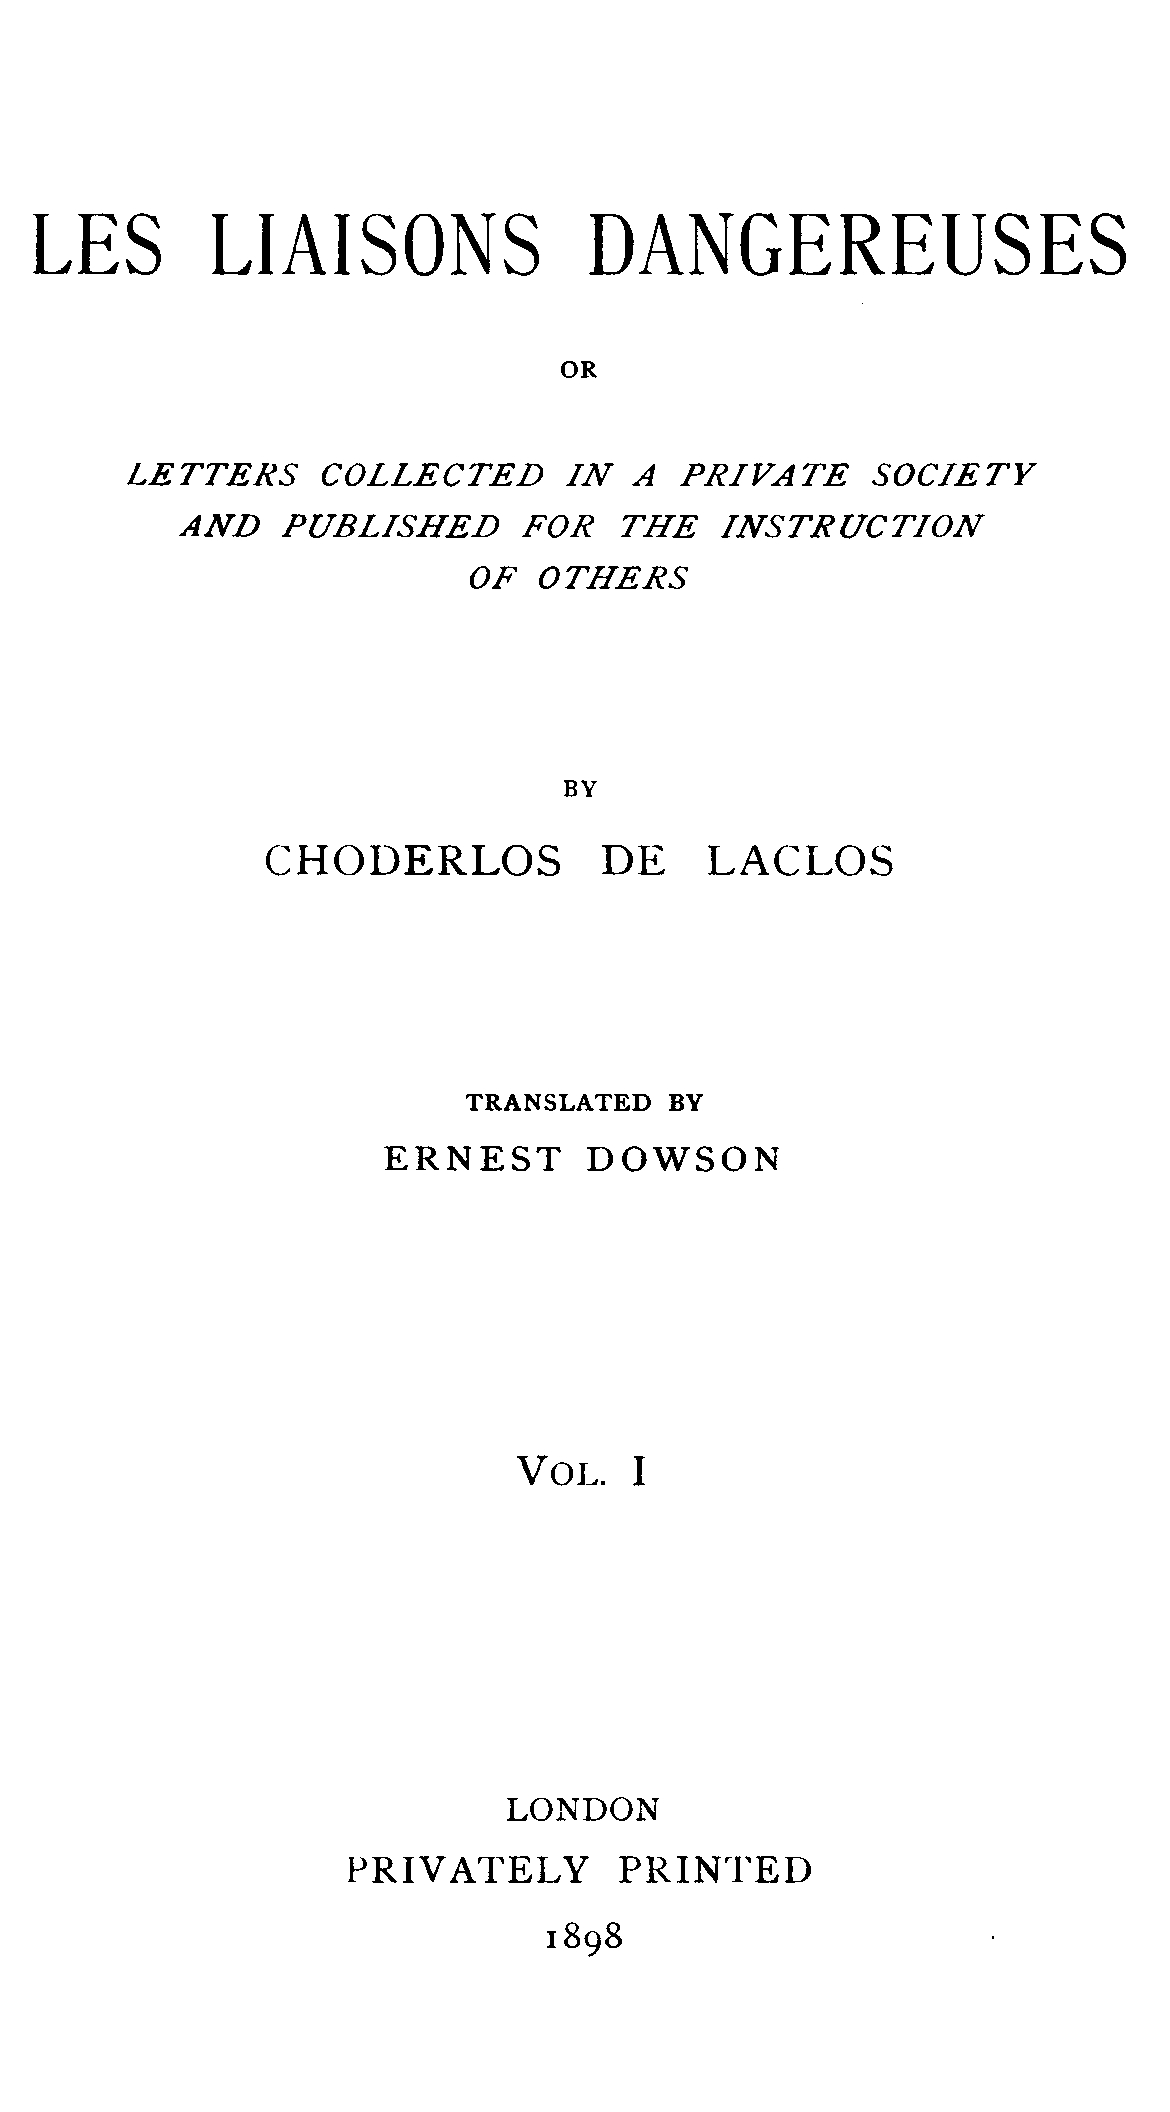 Les liaisons dangereuses, volume 1 (of 2)&#10;or, Letters collected in a private society and published for the instruction of others